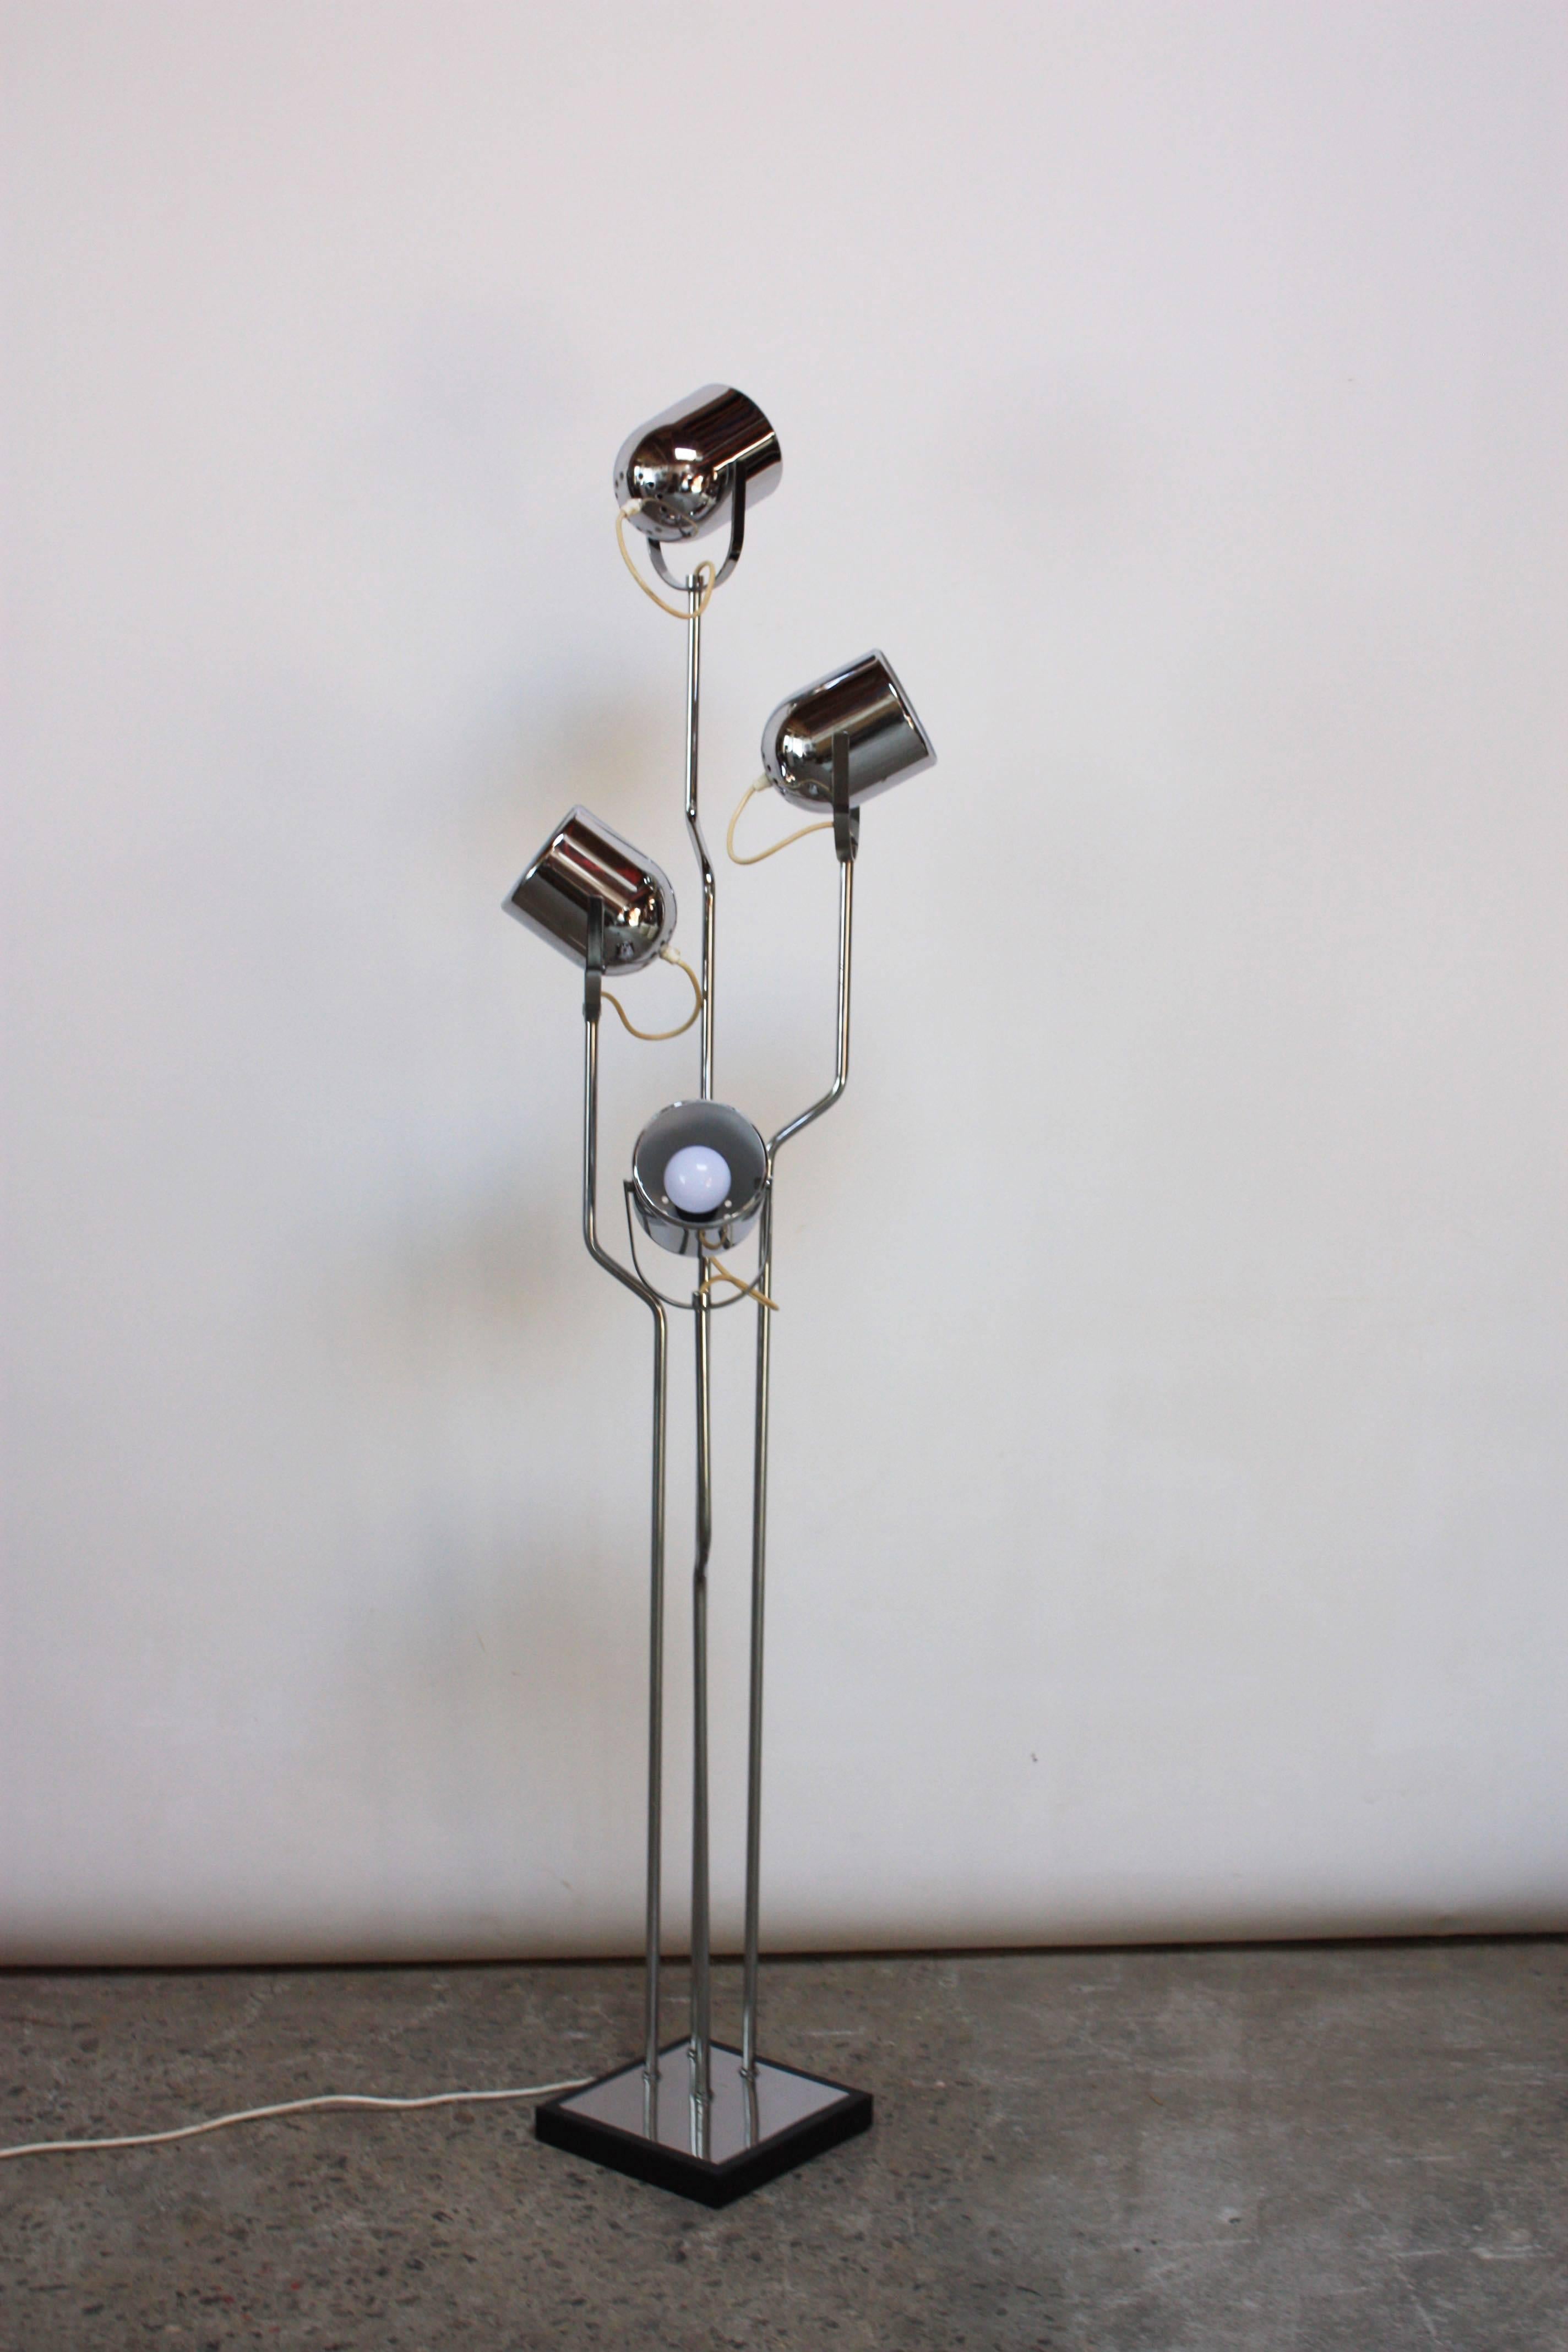 This 1970s Reggiani chromed-steel floor lamp features four fully adjustable fixtures affixed to a corresponding chromed-steel bent rod. 
There is a slight dimensional variation, dependent on how the fixtures are adjusted, but the overall dimensions